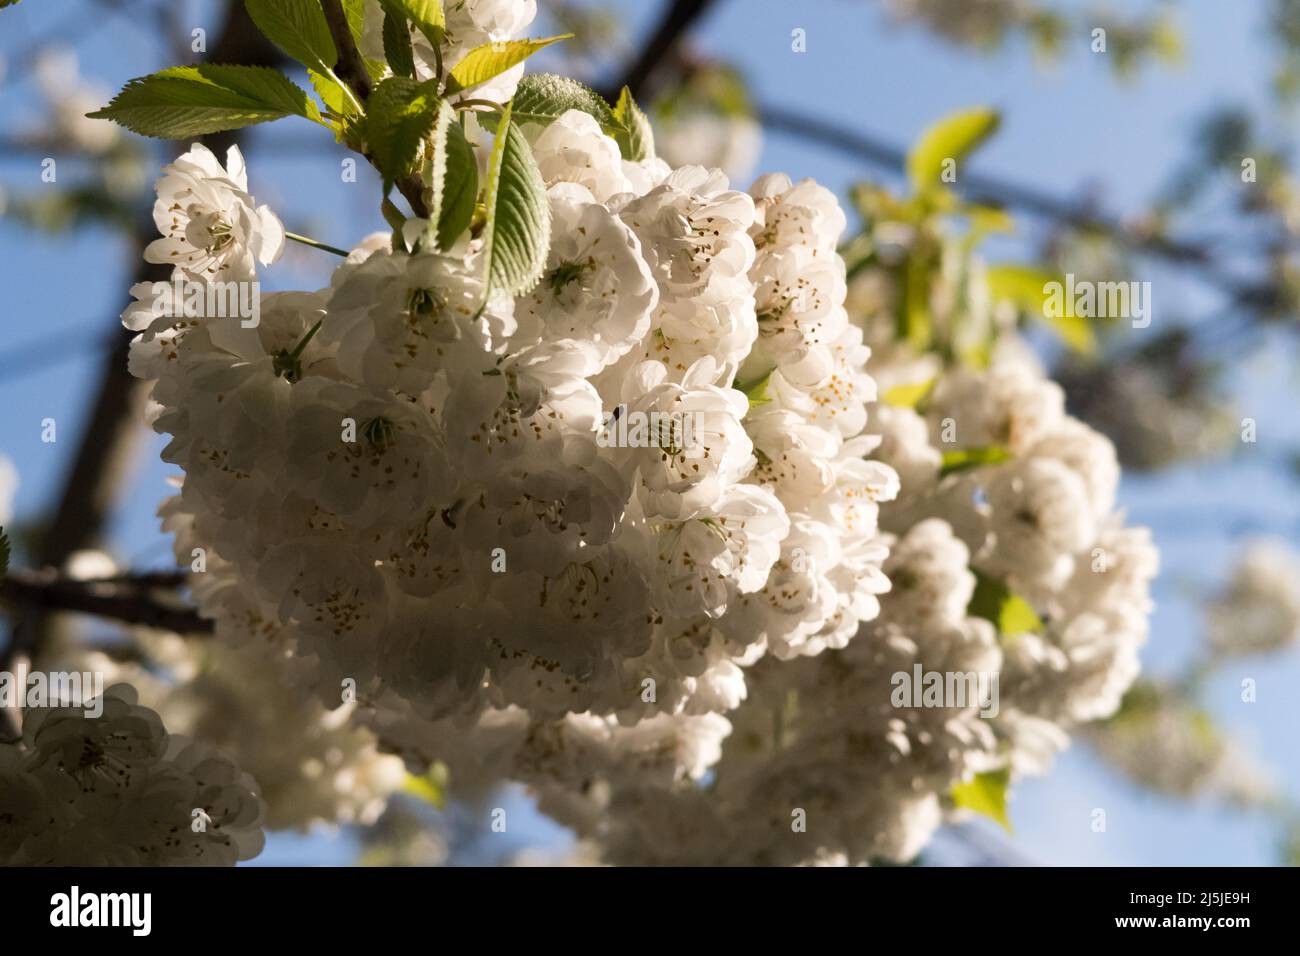 A cherry tree blossoming with white flowers in spring Stock Photo